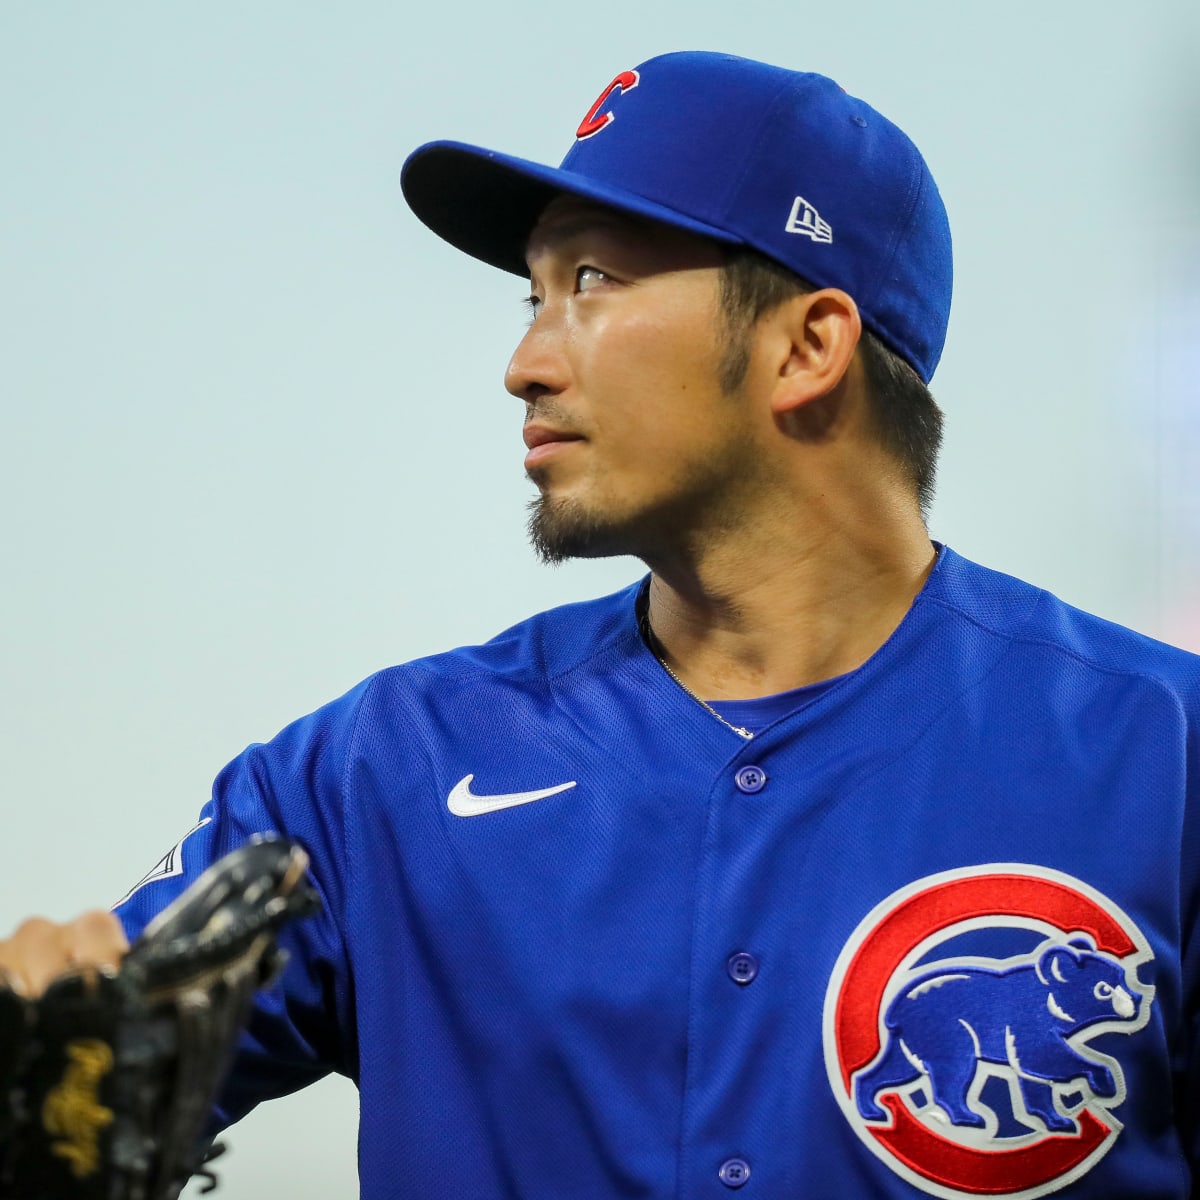 Seiya Suzuki hints at potential return to the Chicago Cubs